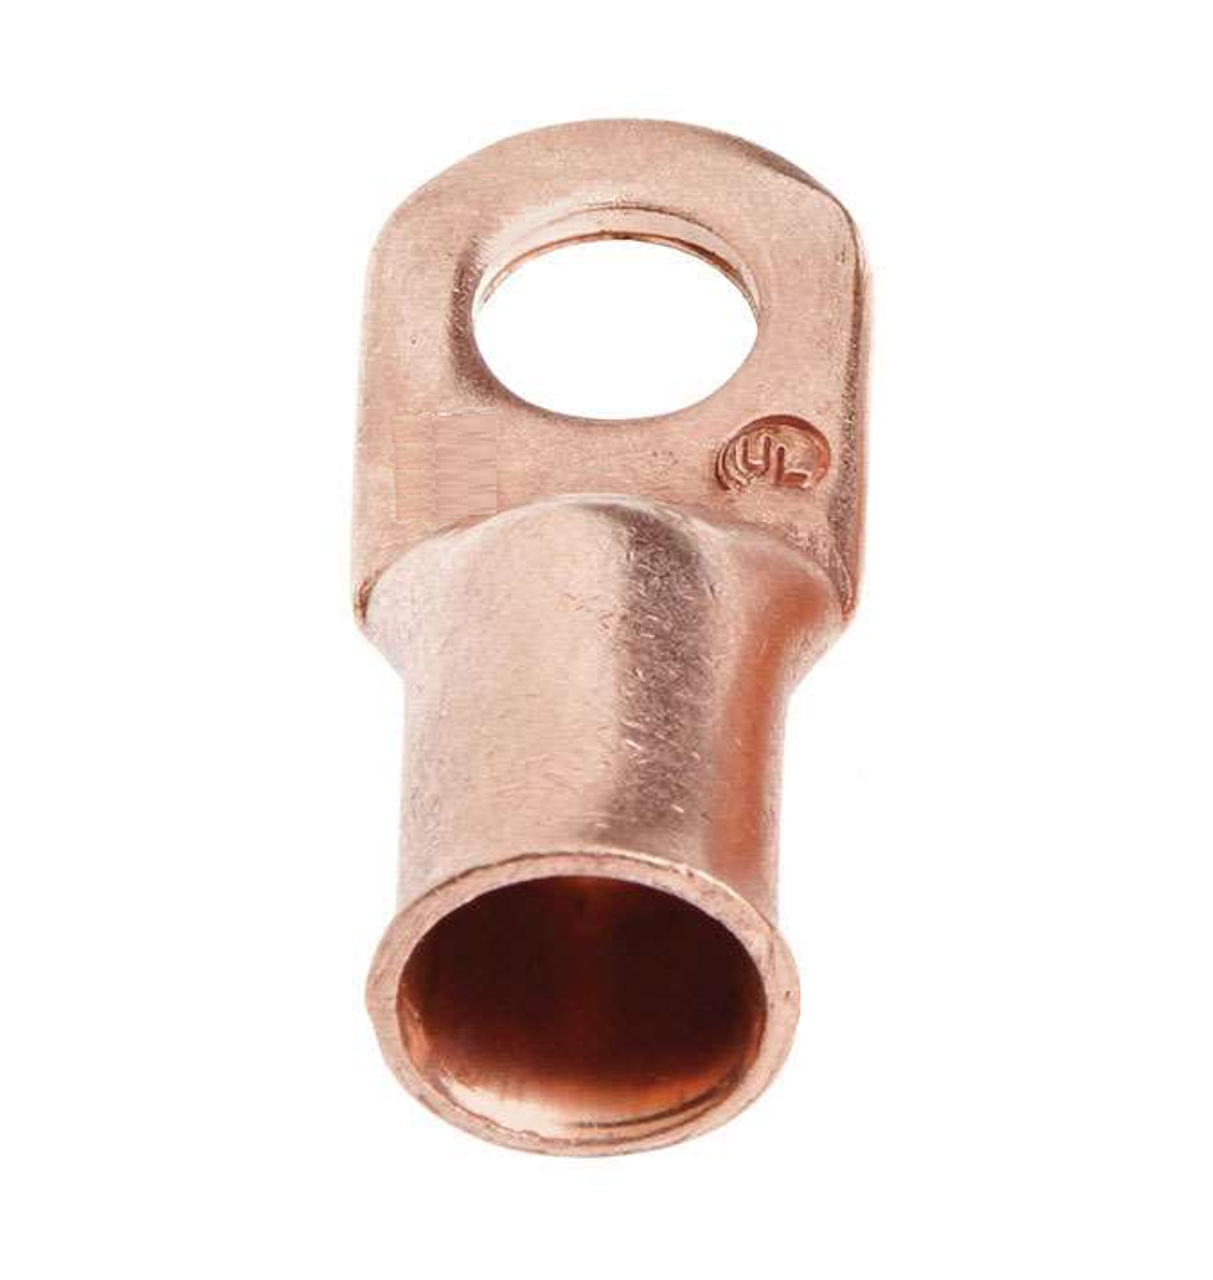 CES-4141 - #4 AWG Seamless Copper Ring Terminal 1/4-Inch Bolt Hole